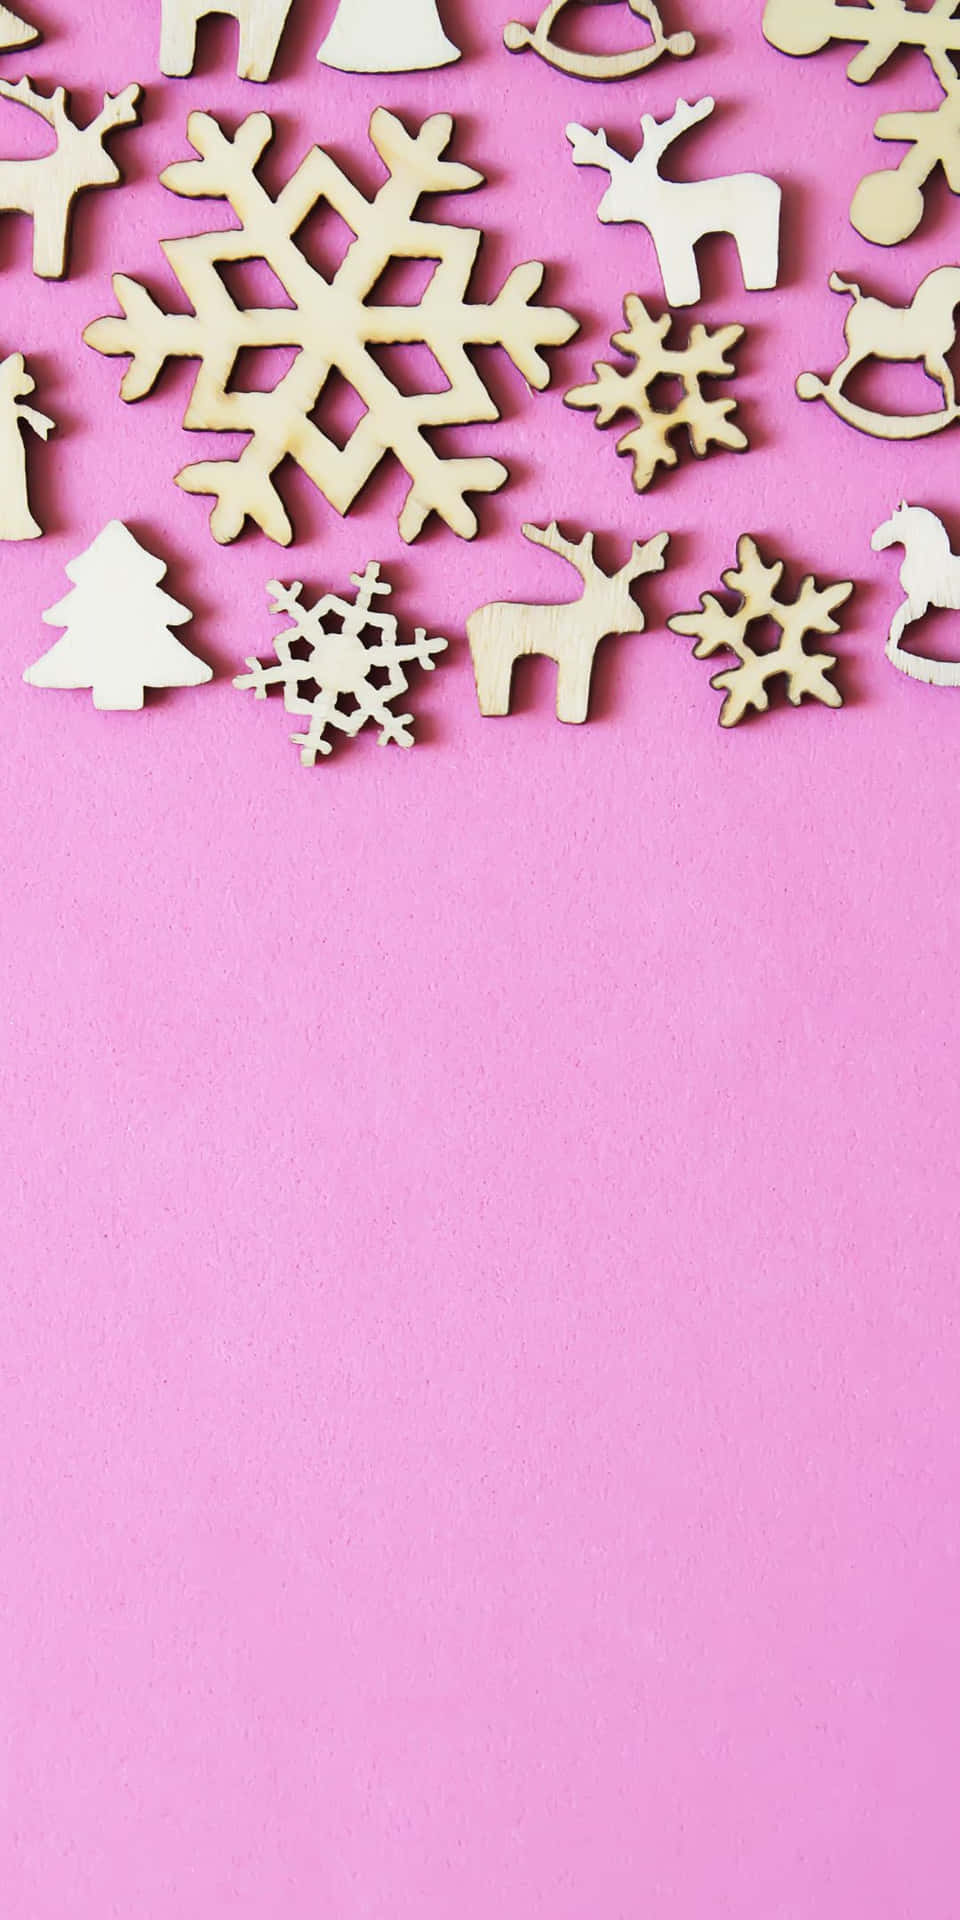 A Pink Background With Wooden Christmas Decorations